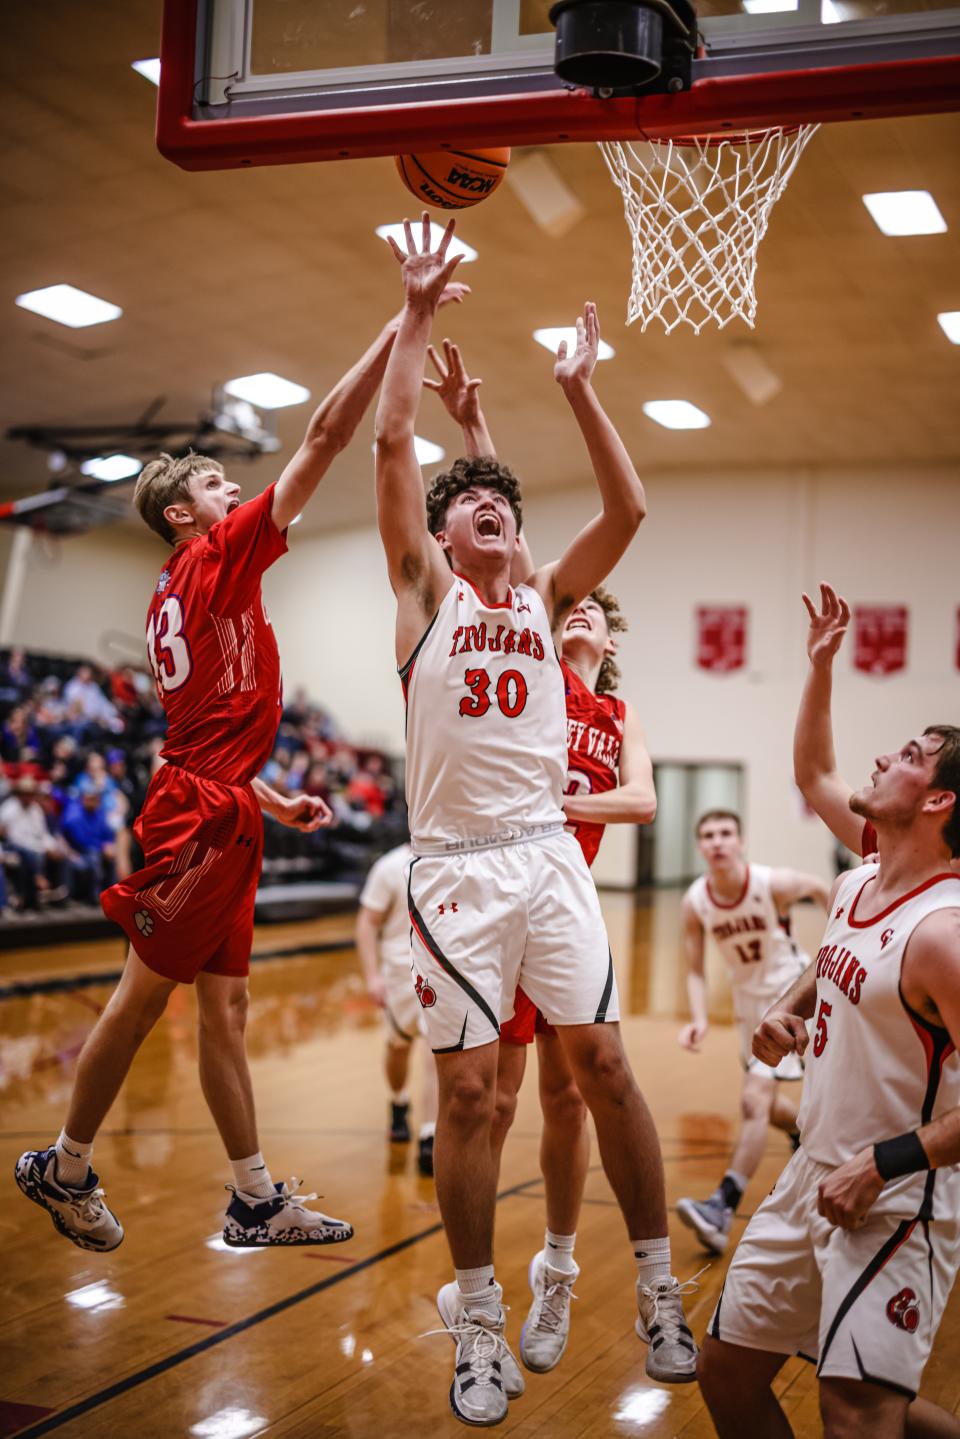 Caney Valley's Brayden Peckham rebounds and shoots while drawing a foul during Thursday night's game.